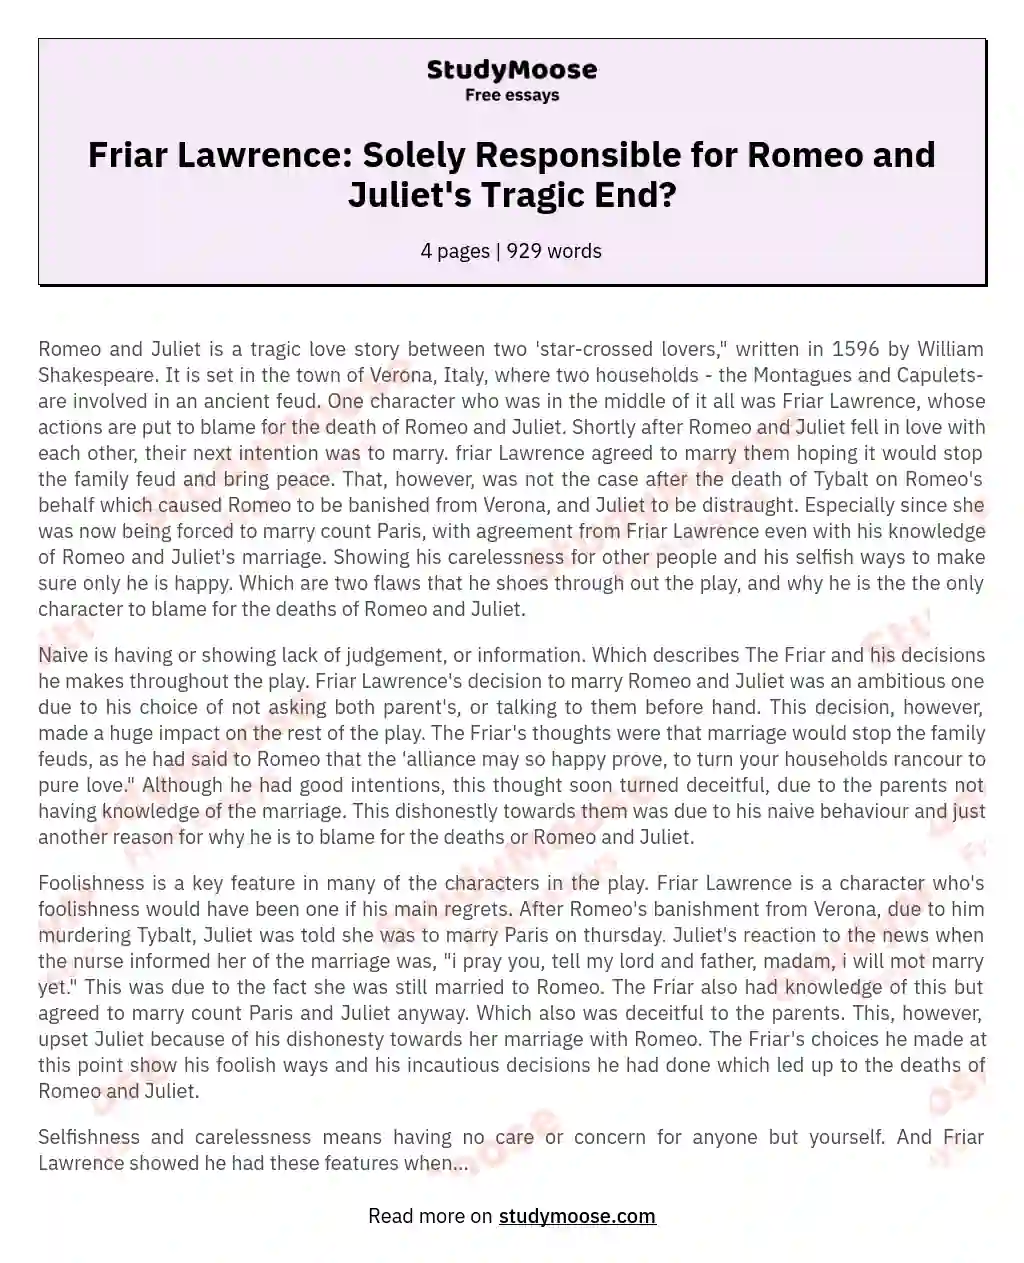 Friar Lawrence: Solely Responsible for Romeo and Juliet's Tragic End?